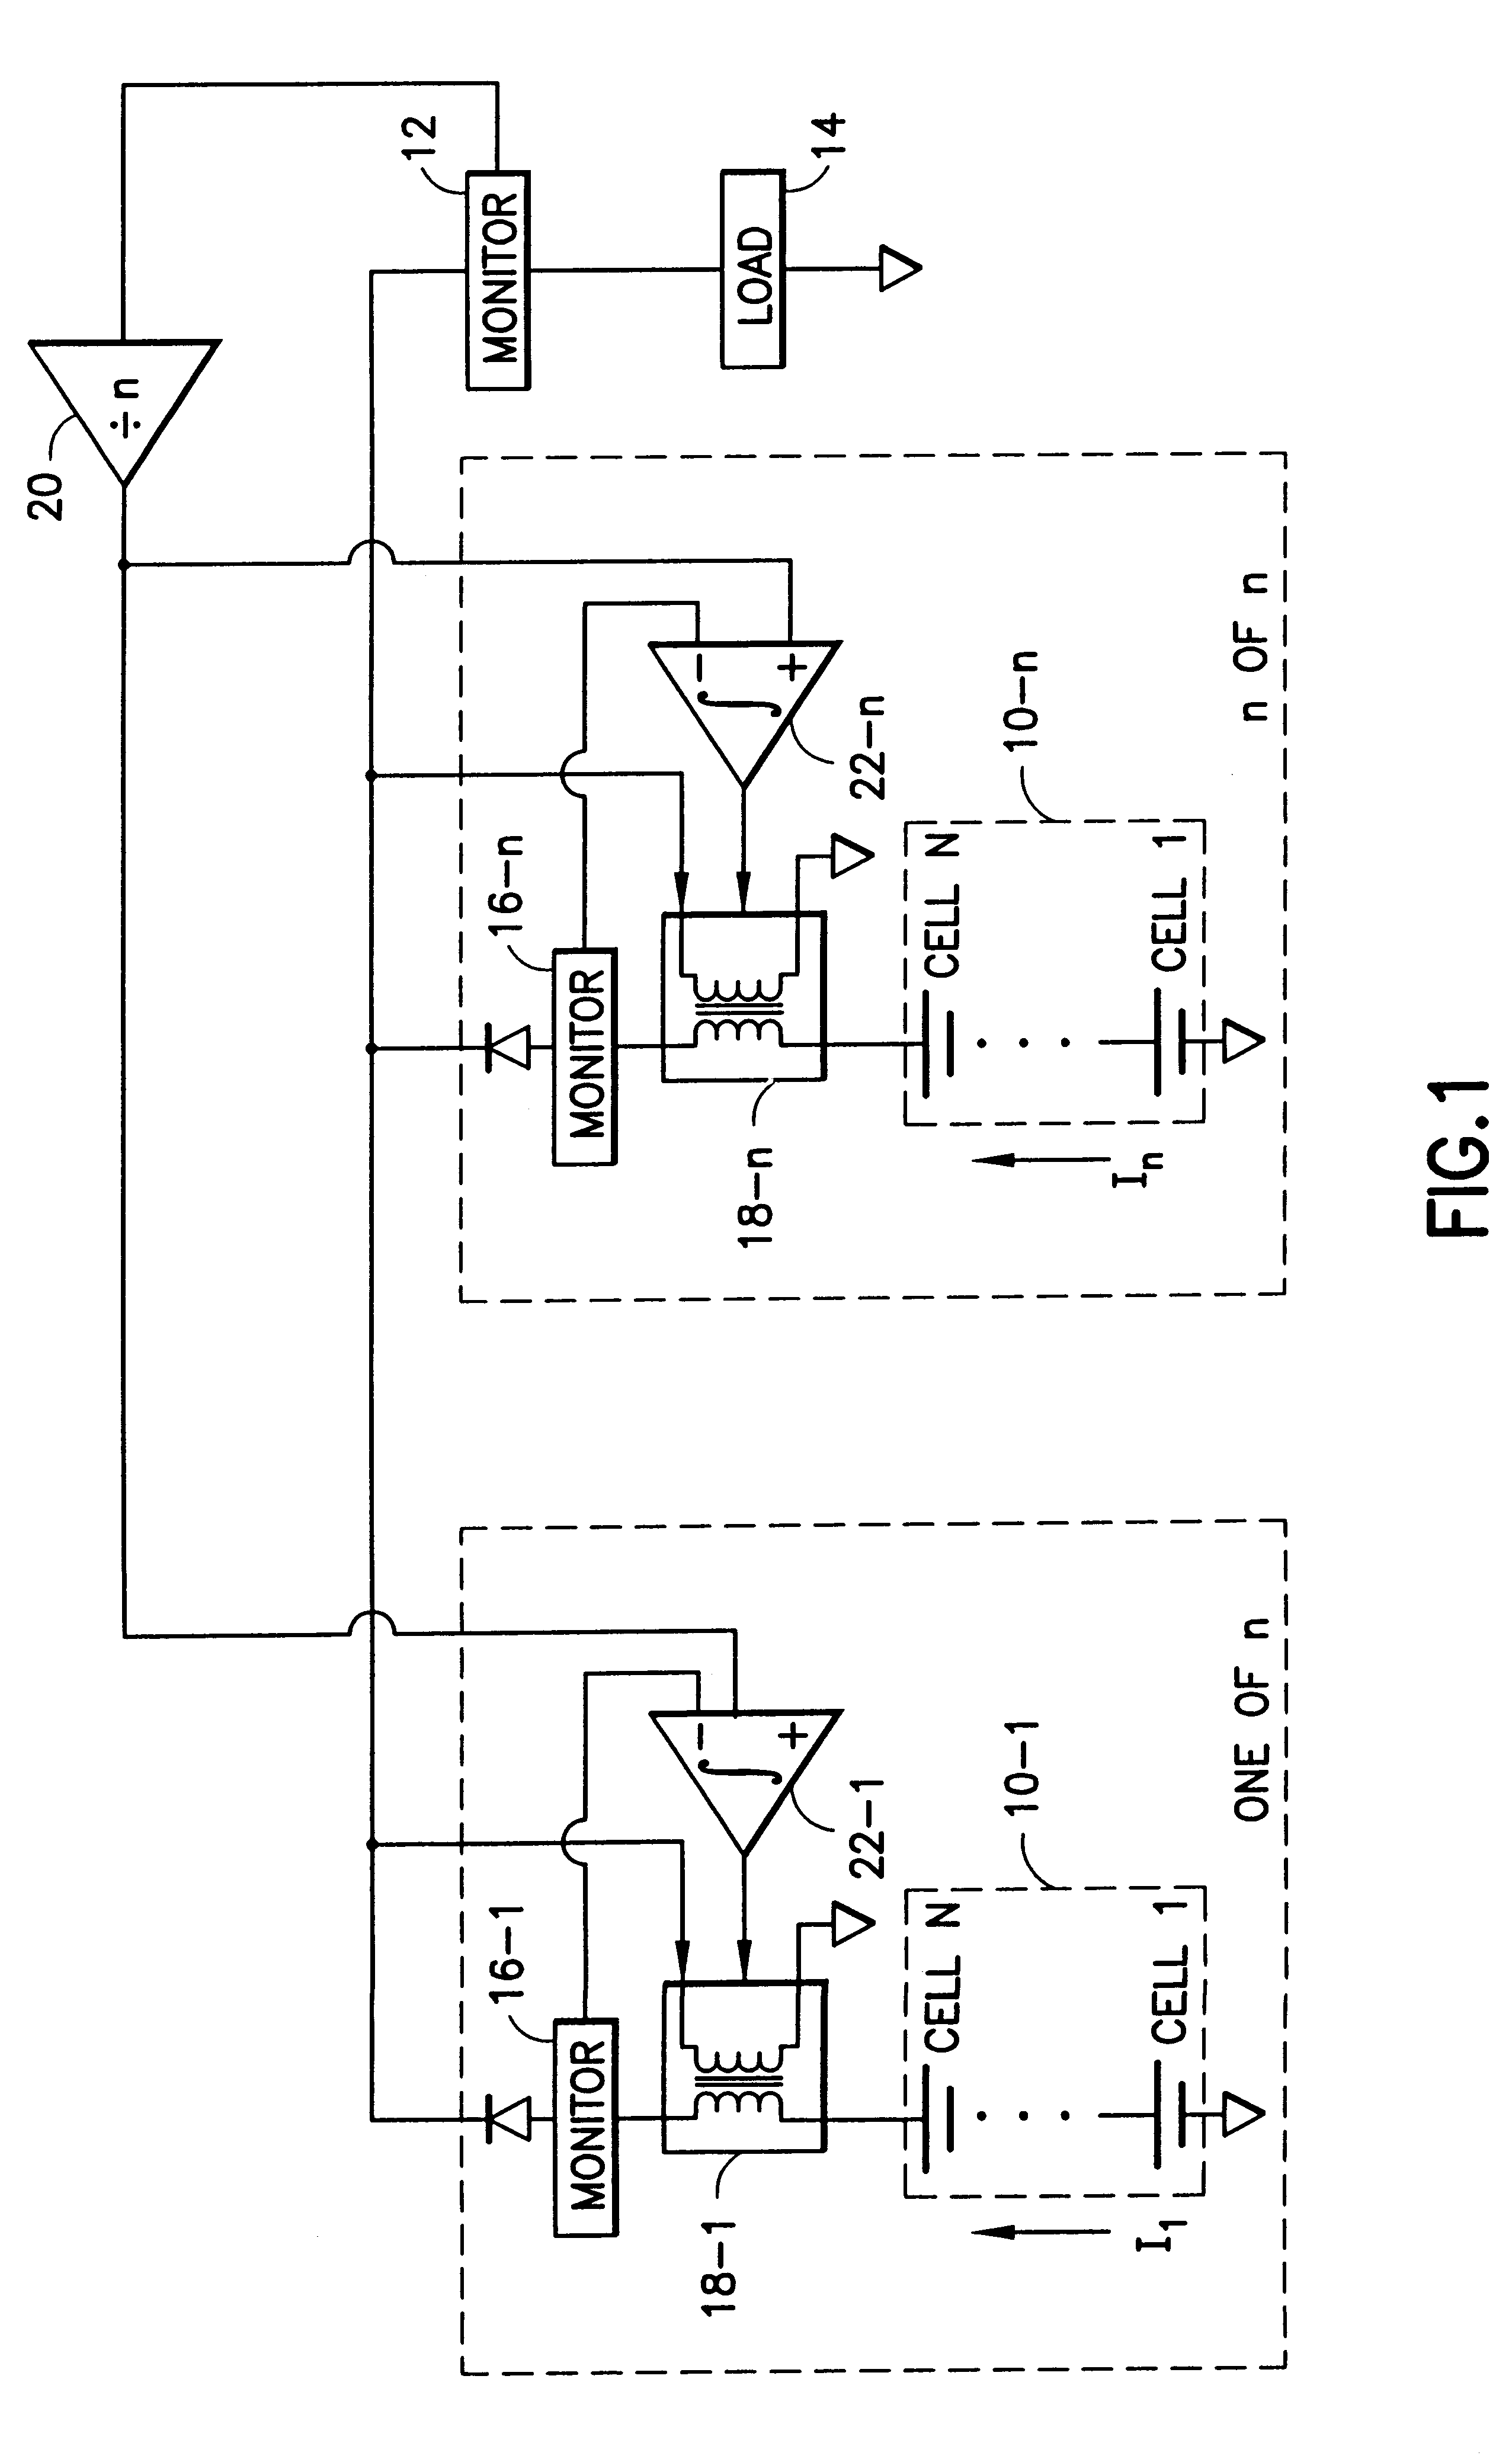 Apparatus to control multiple parallel batteries to share load current